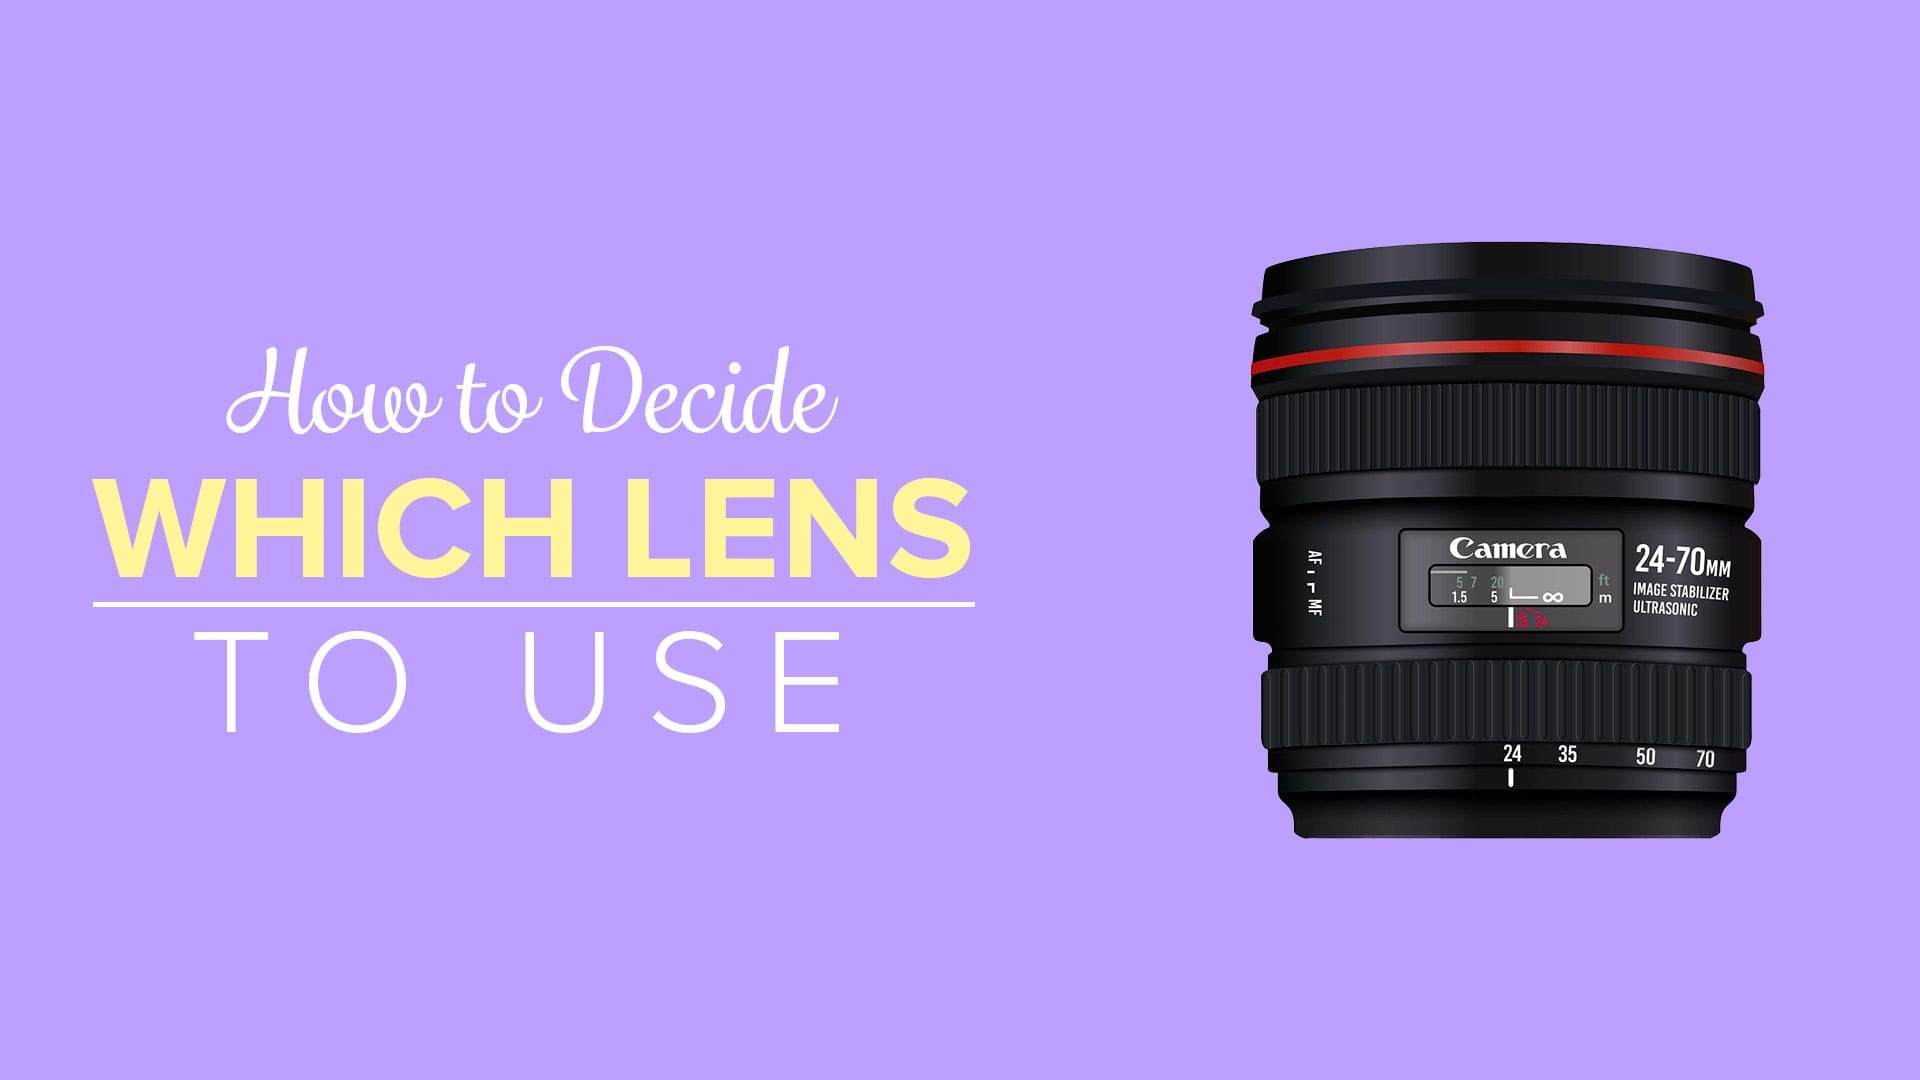 How to Decide Which Lens to Use